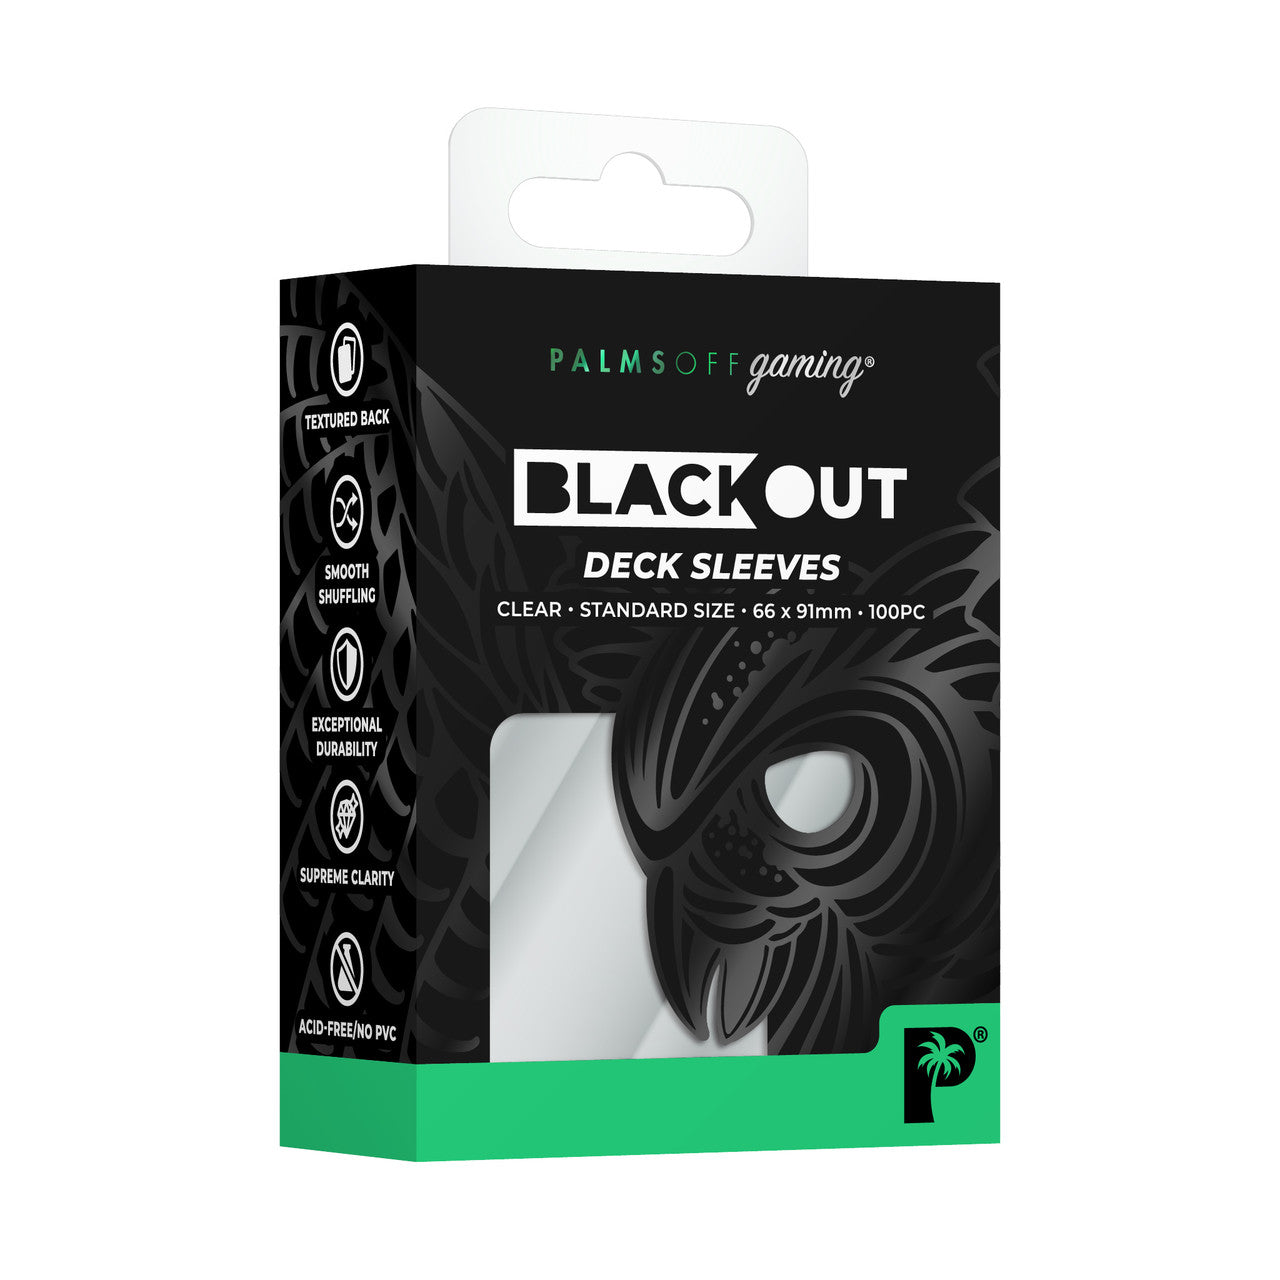 Palms Off Gaming - Blackout Deck Sleeves - Standard Size (100pc) - Clear